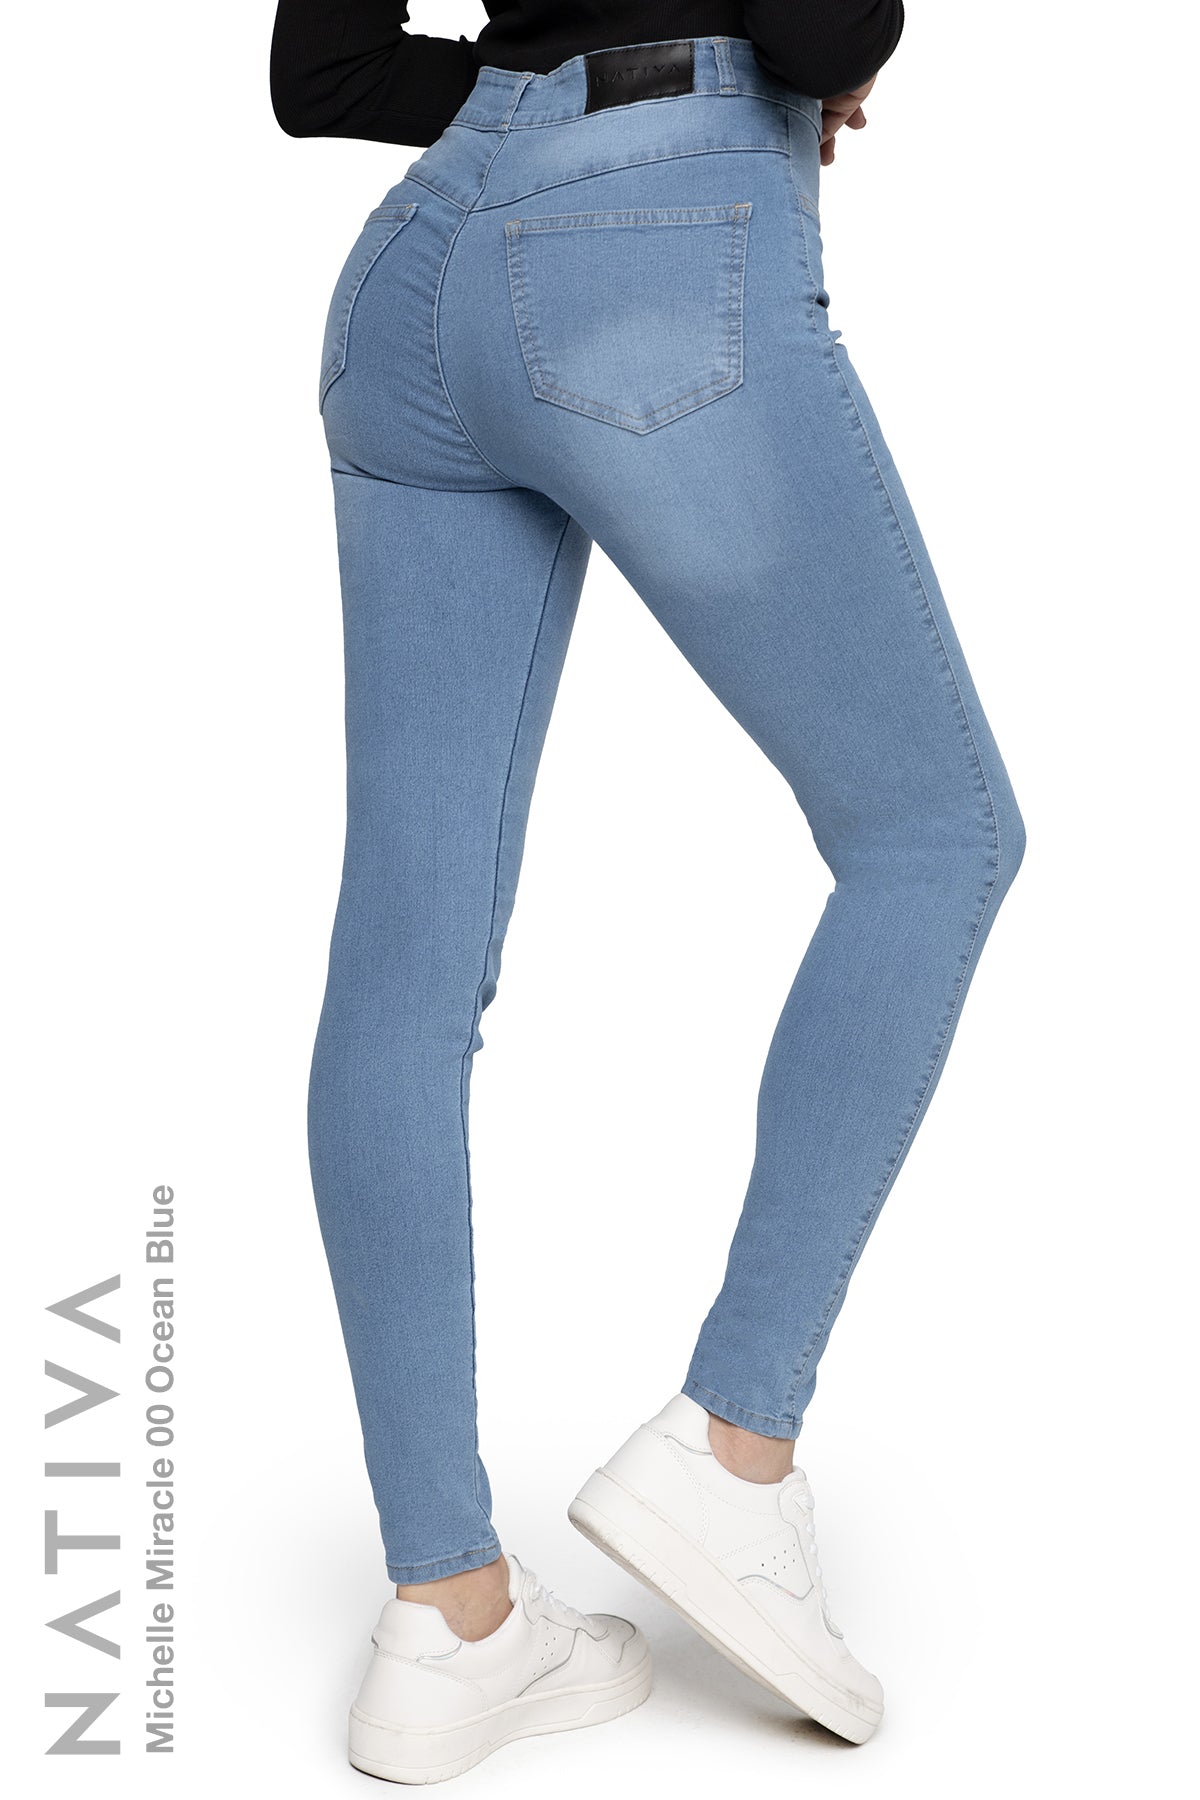 NATIVA, STRETCH JEANS. MICHELLE Ca 00 BLUE, MIRACLE OCEAN High Shaping